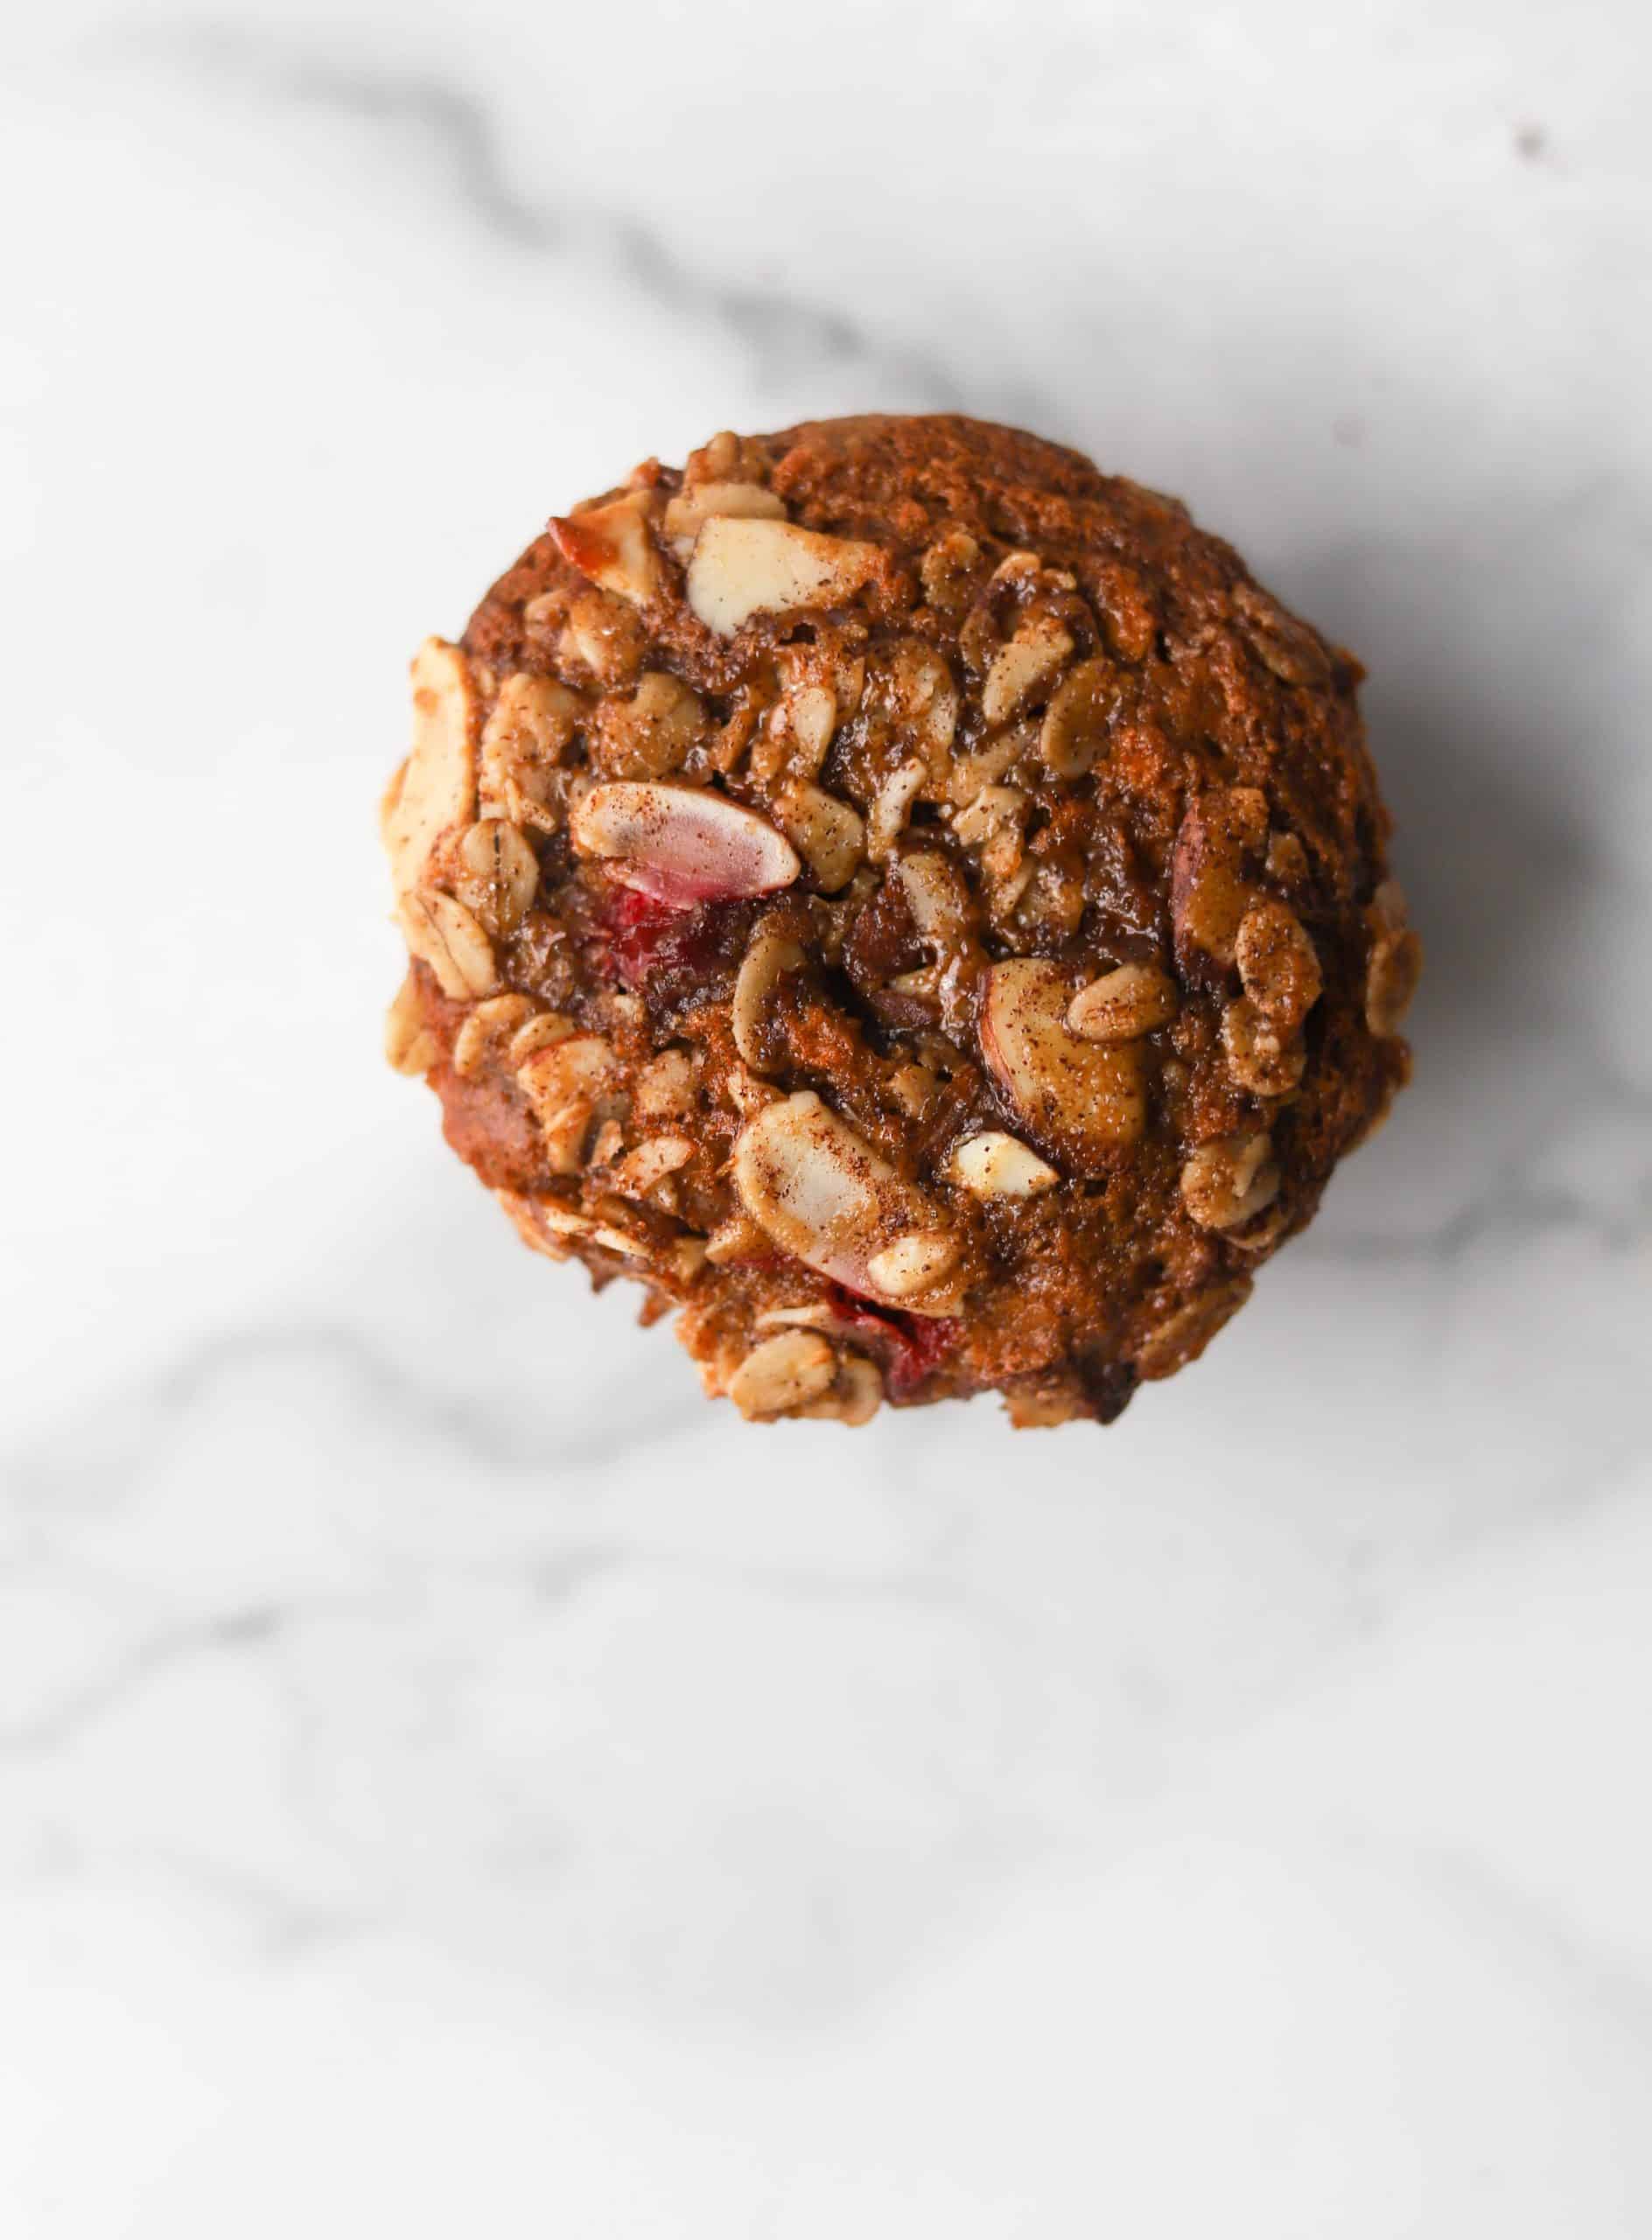 Ginger almond muffin on a marble background